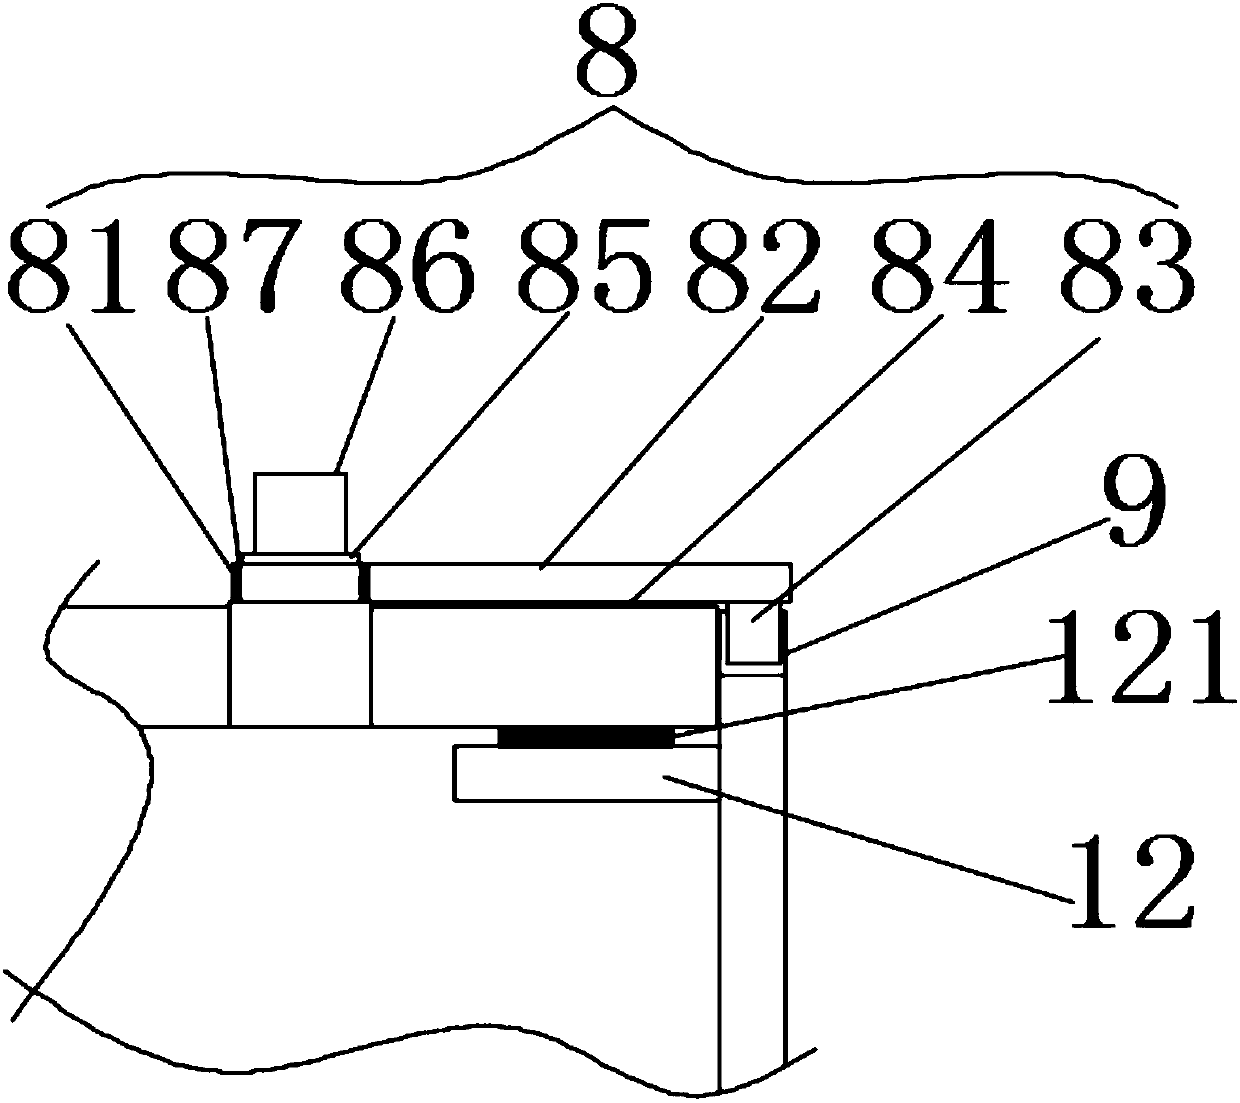 Device for detecting flatness of conductive metal